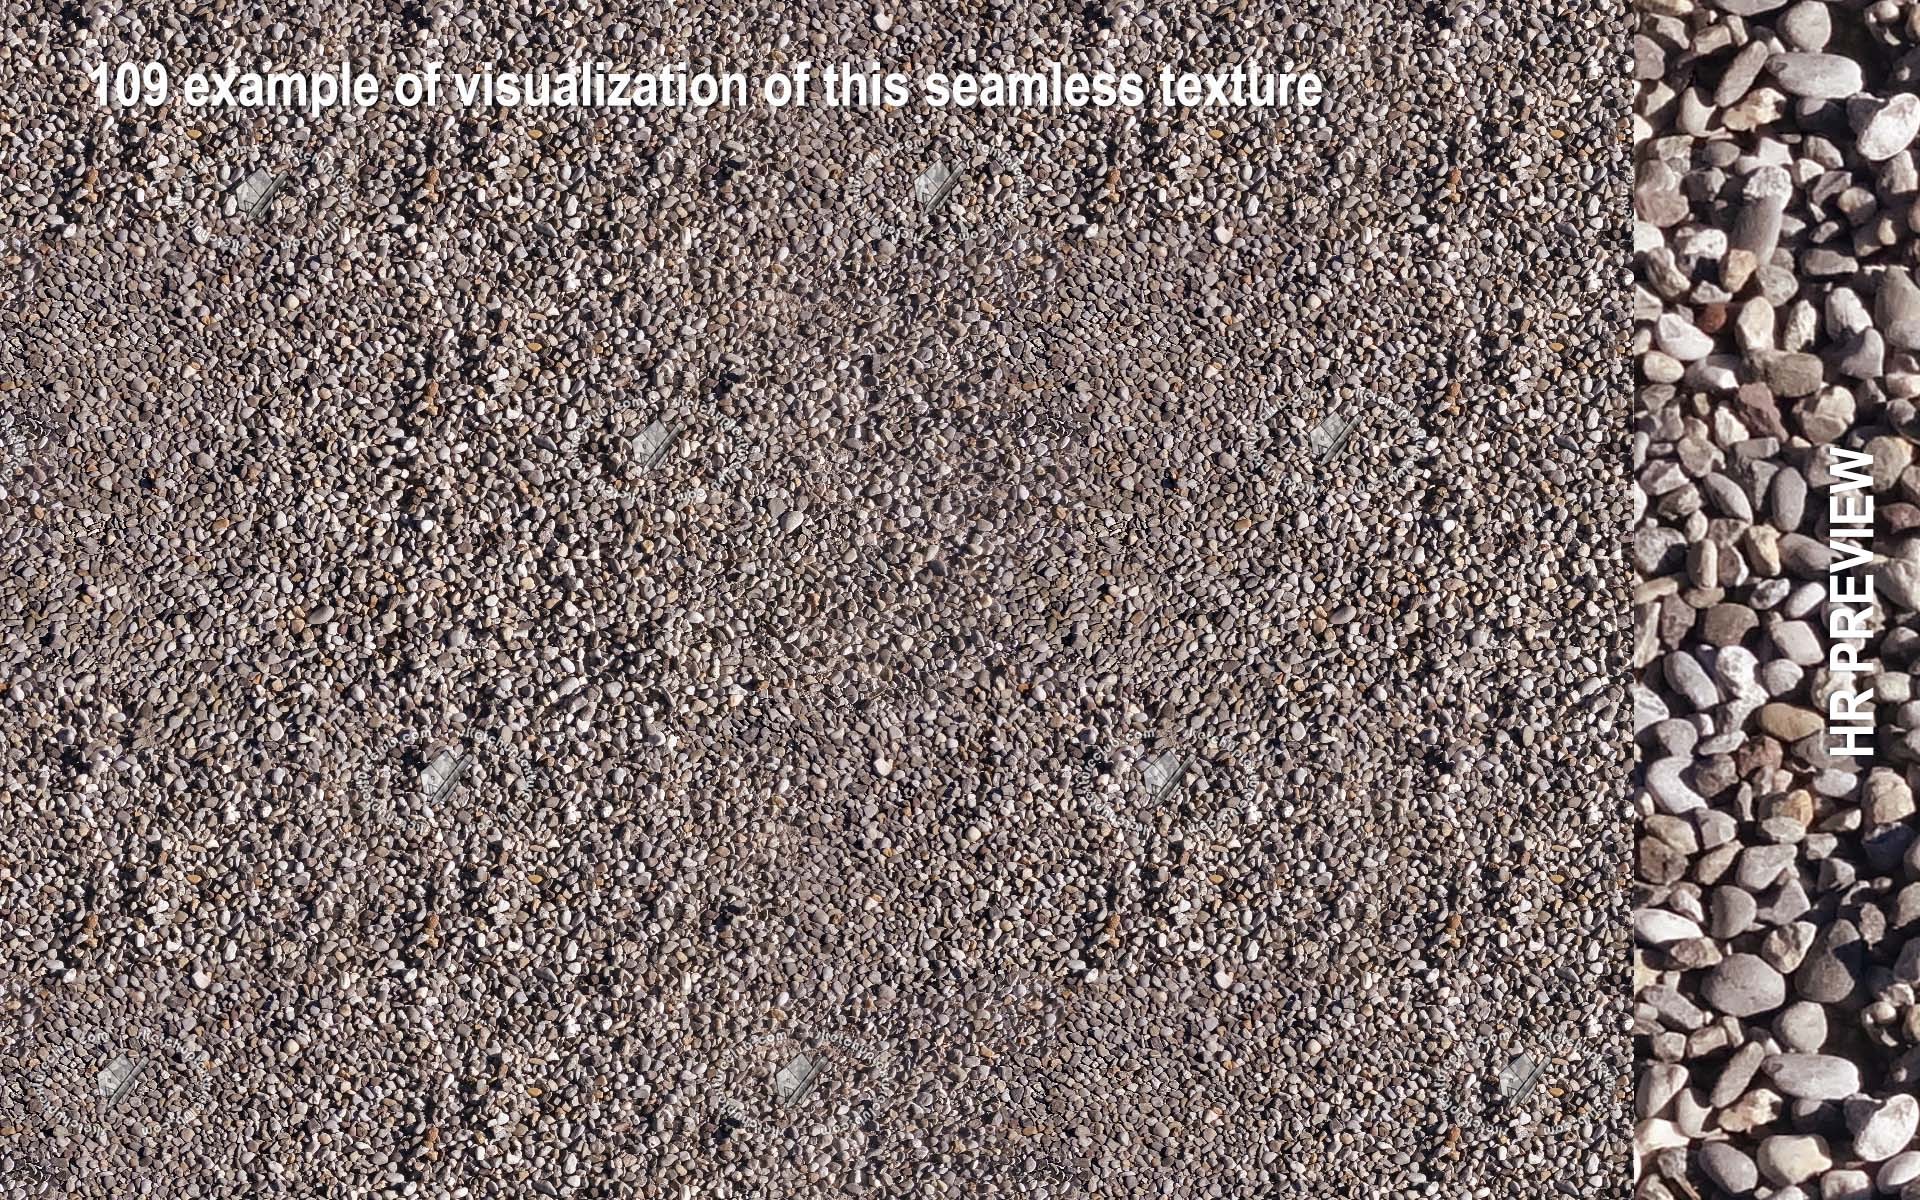 109 - example of visualization of this seamless texture